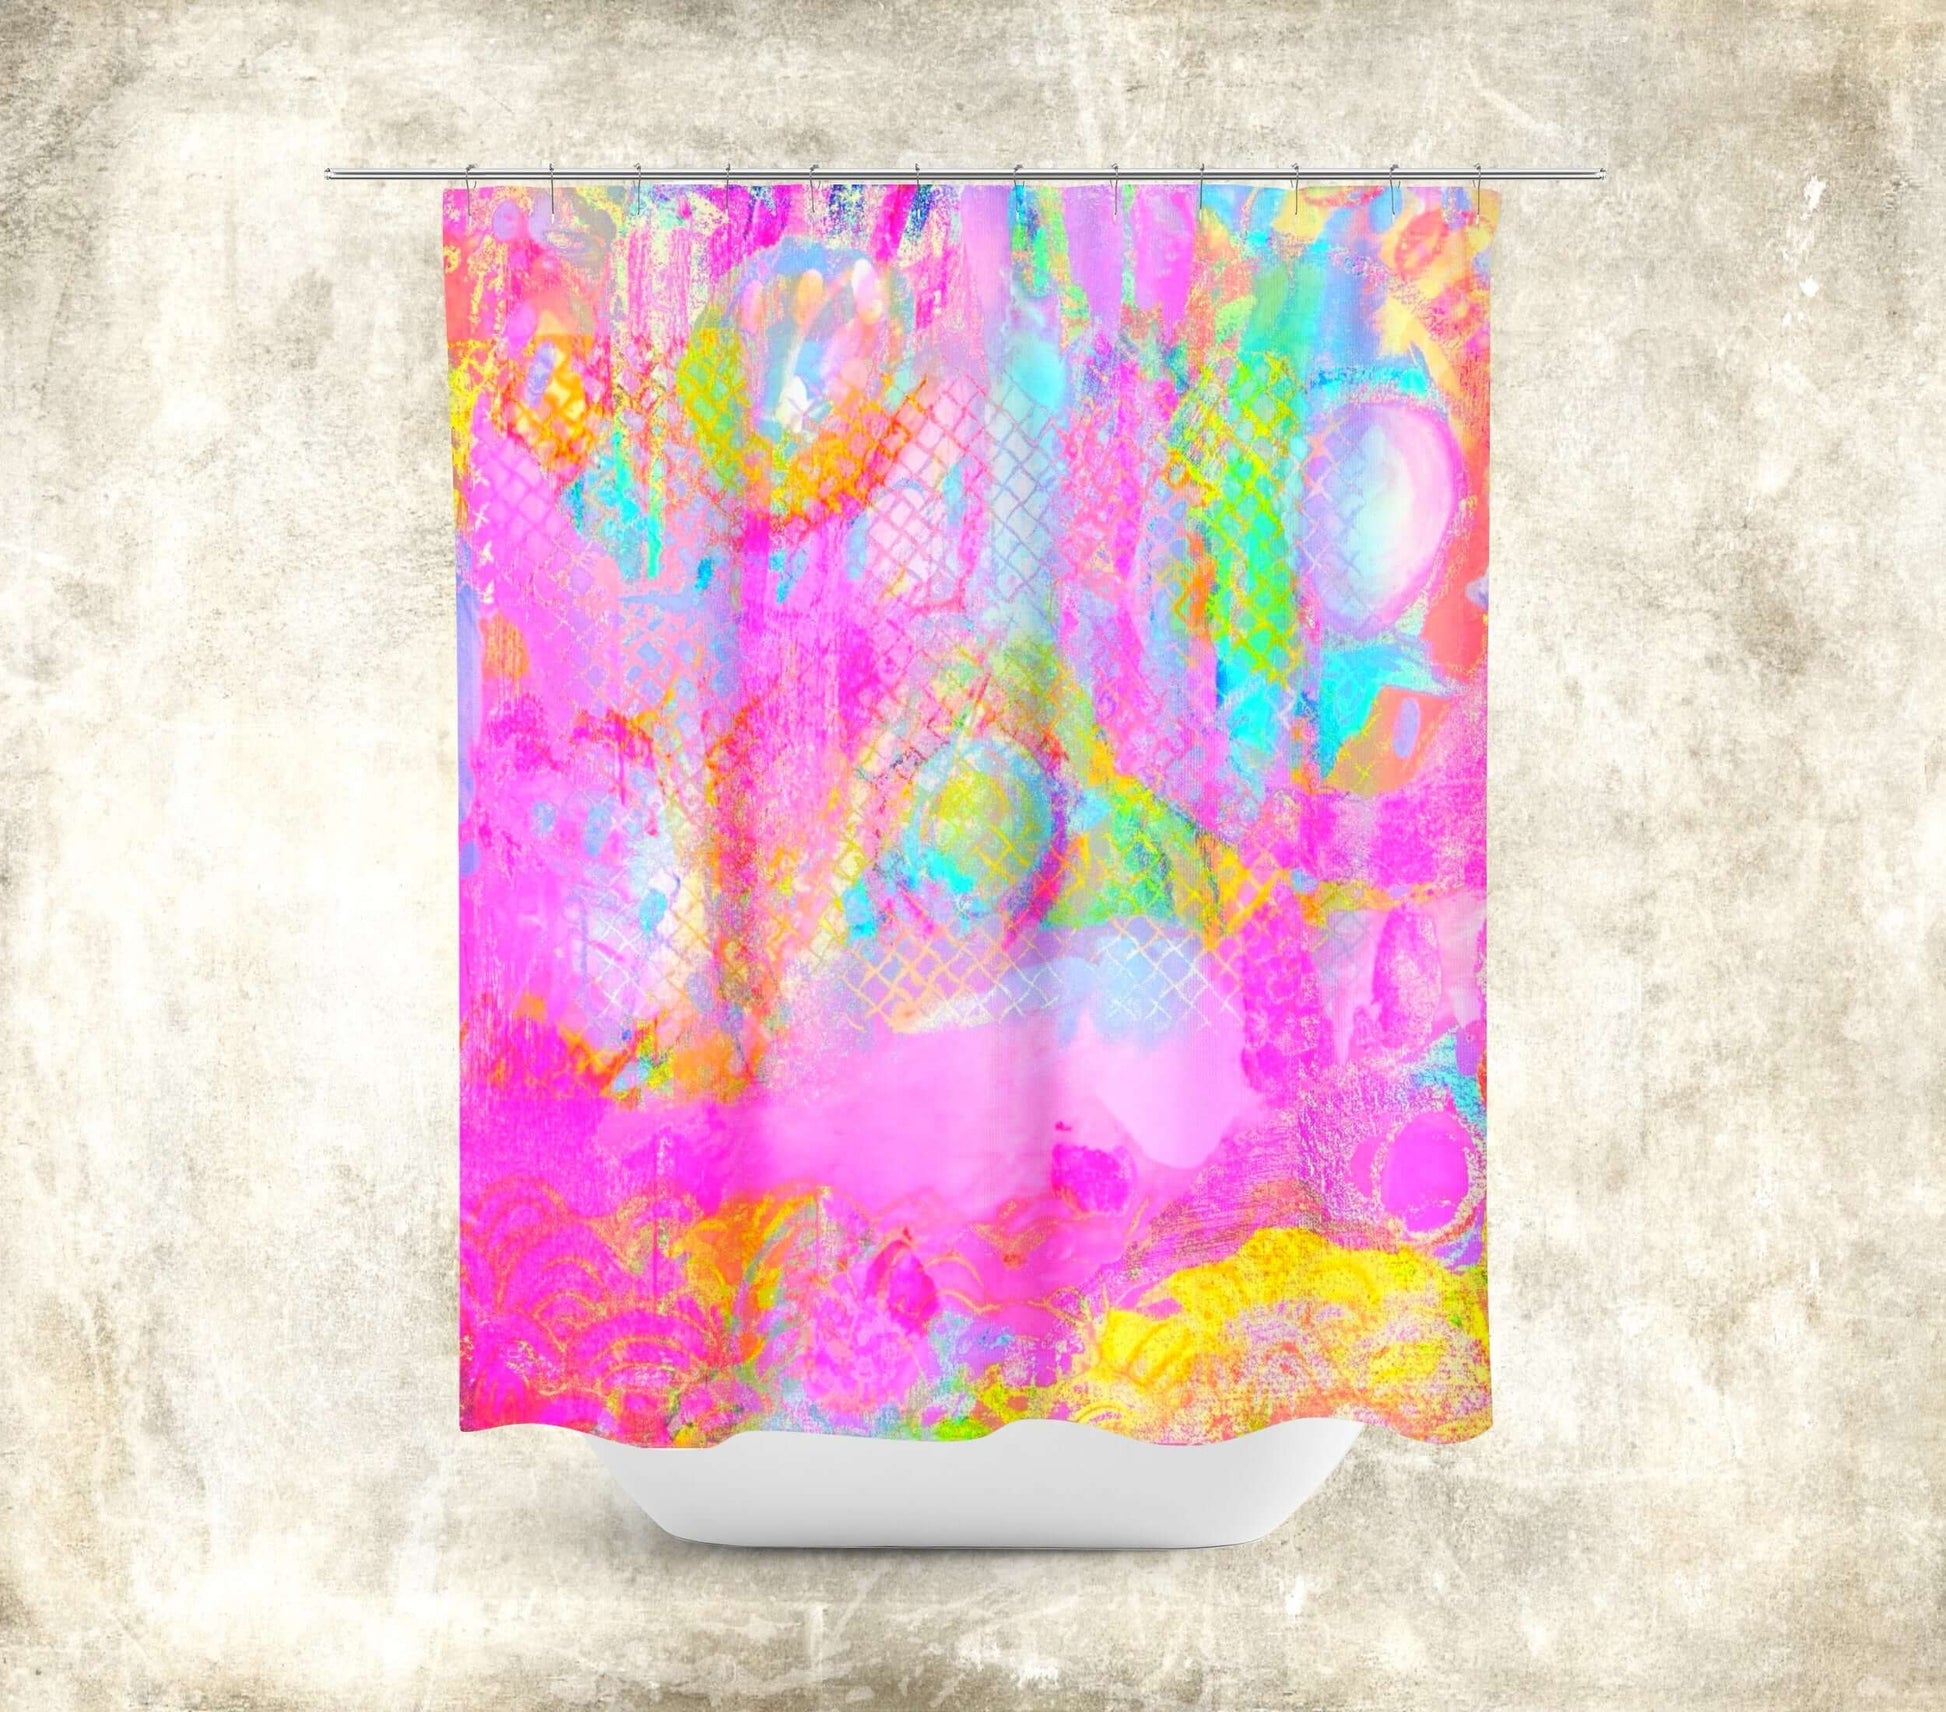 Drippy Pink “Candyland” Abstract Art Colorful Shower Curtain